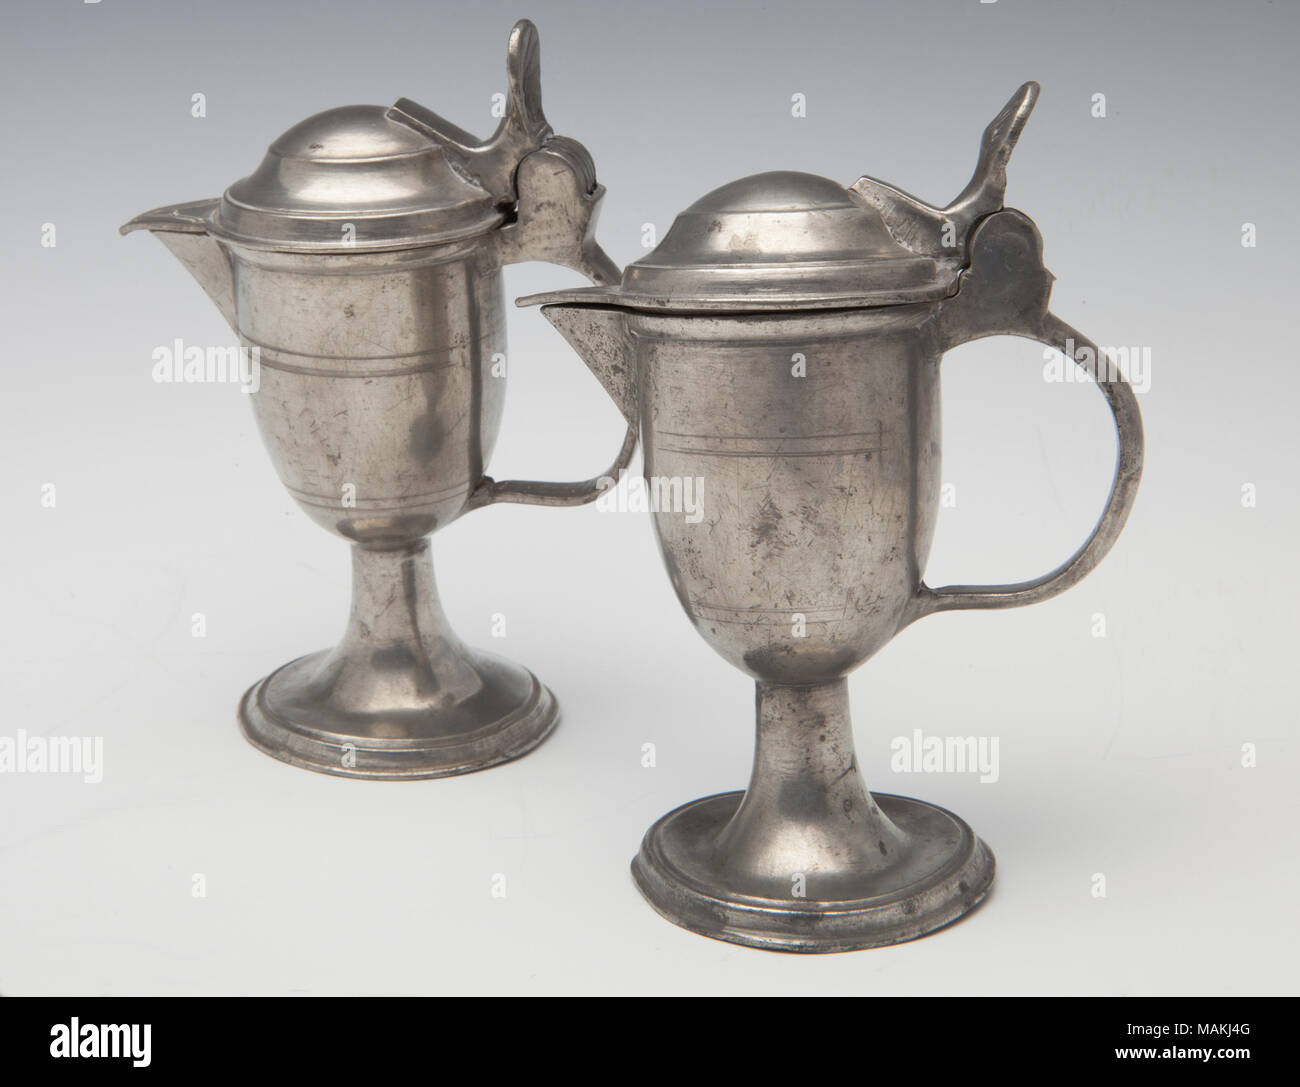 Pair of side handled pewter casters or cruets believed to have been used in first Catholic Church in New Madrid, Missouri. Title: Pair of Casters for Catholic Mass  . circa 1790. Stock Photo